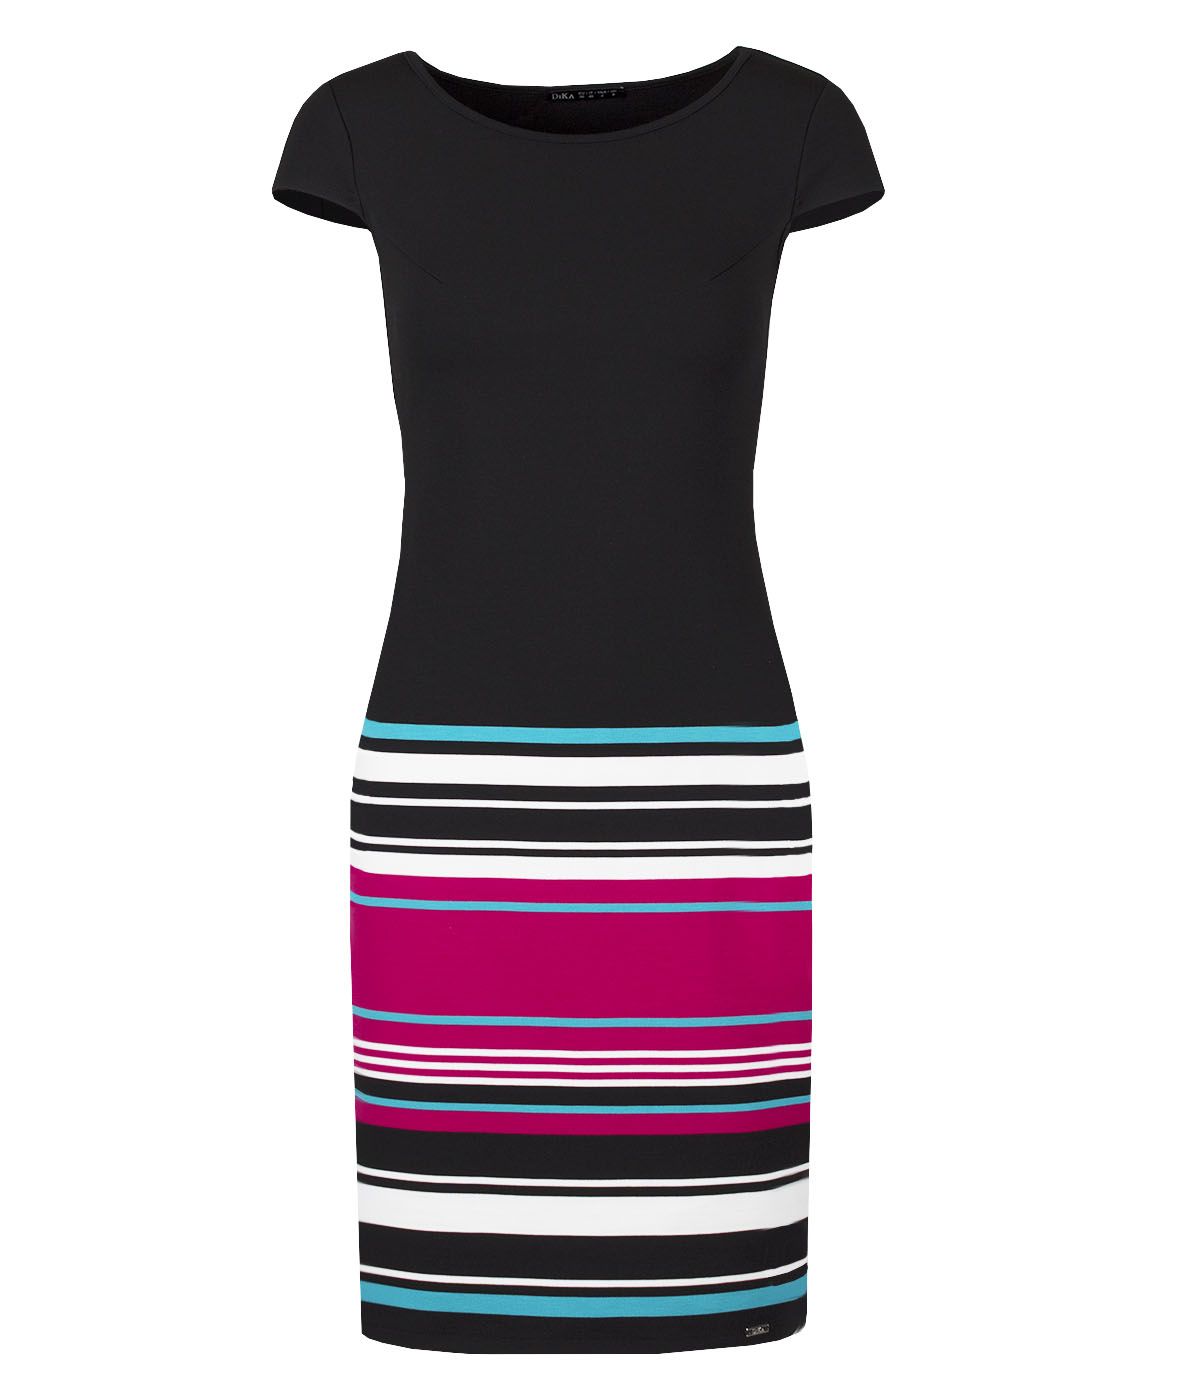 Bodycon short-sleeved dress with stripes print in the lower part 0